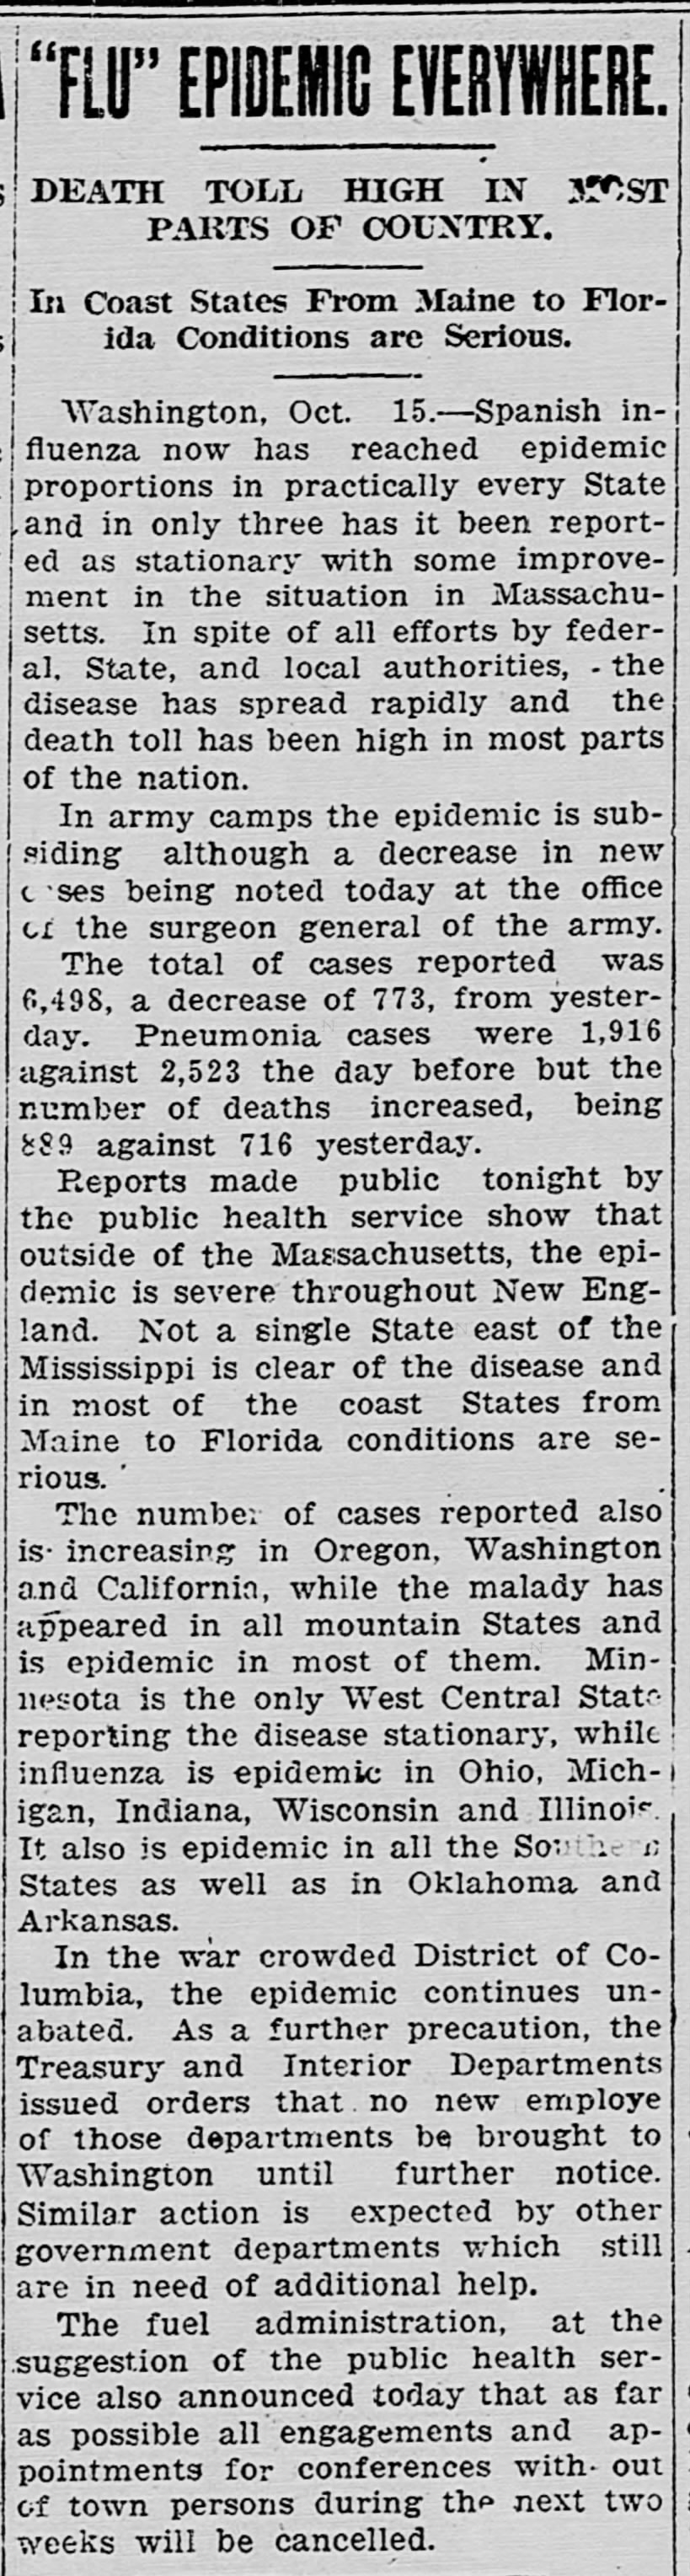 Article reports that 1918 Spanish flu has reached "epidemic proportions in practically every state"